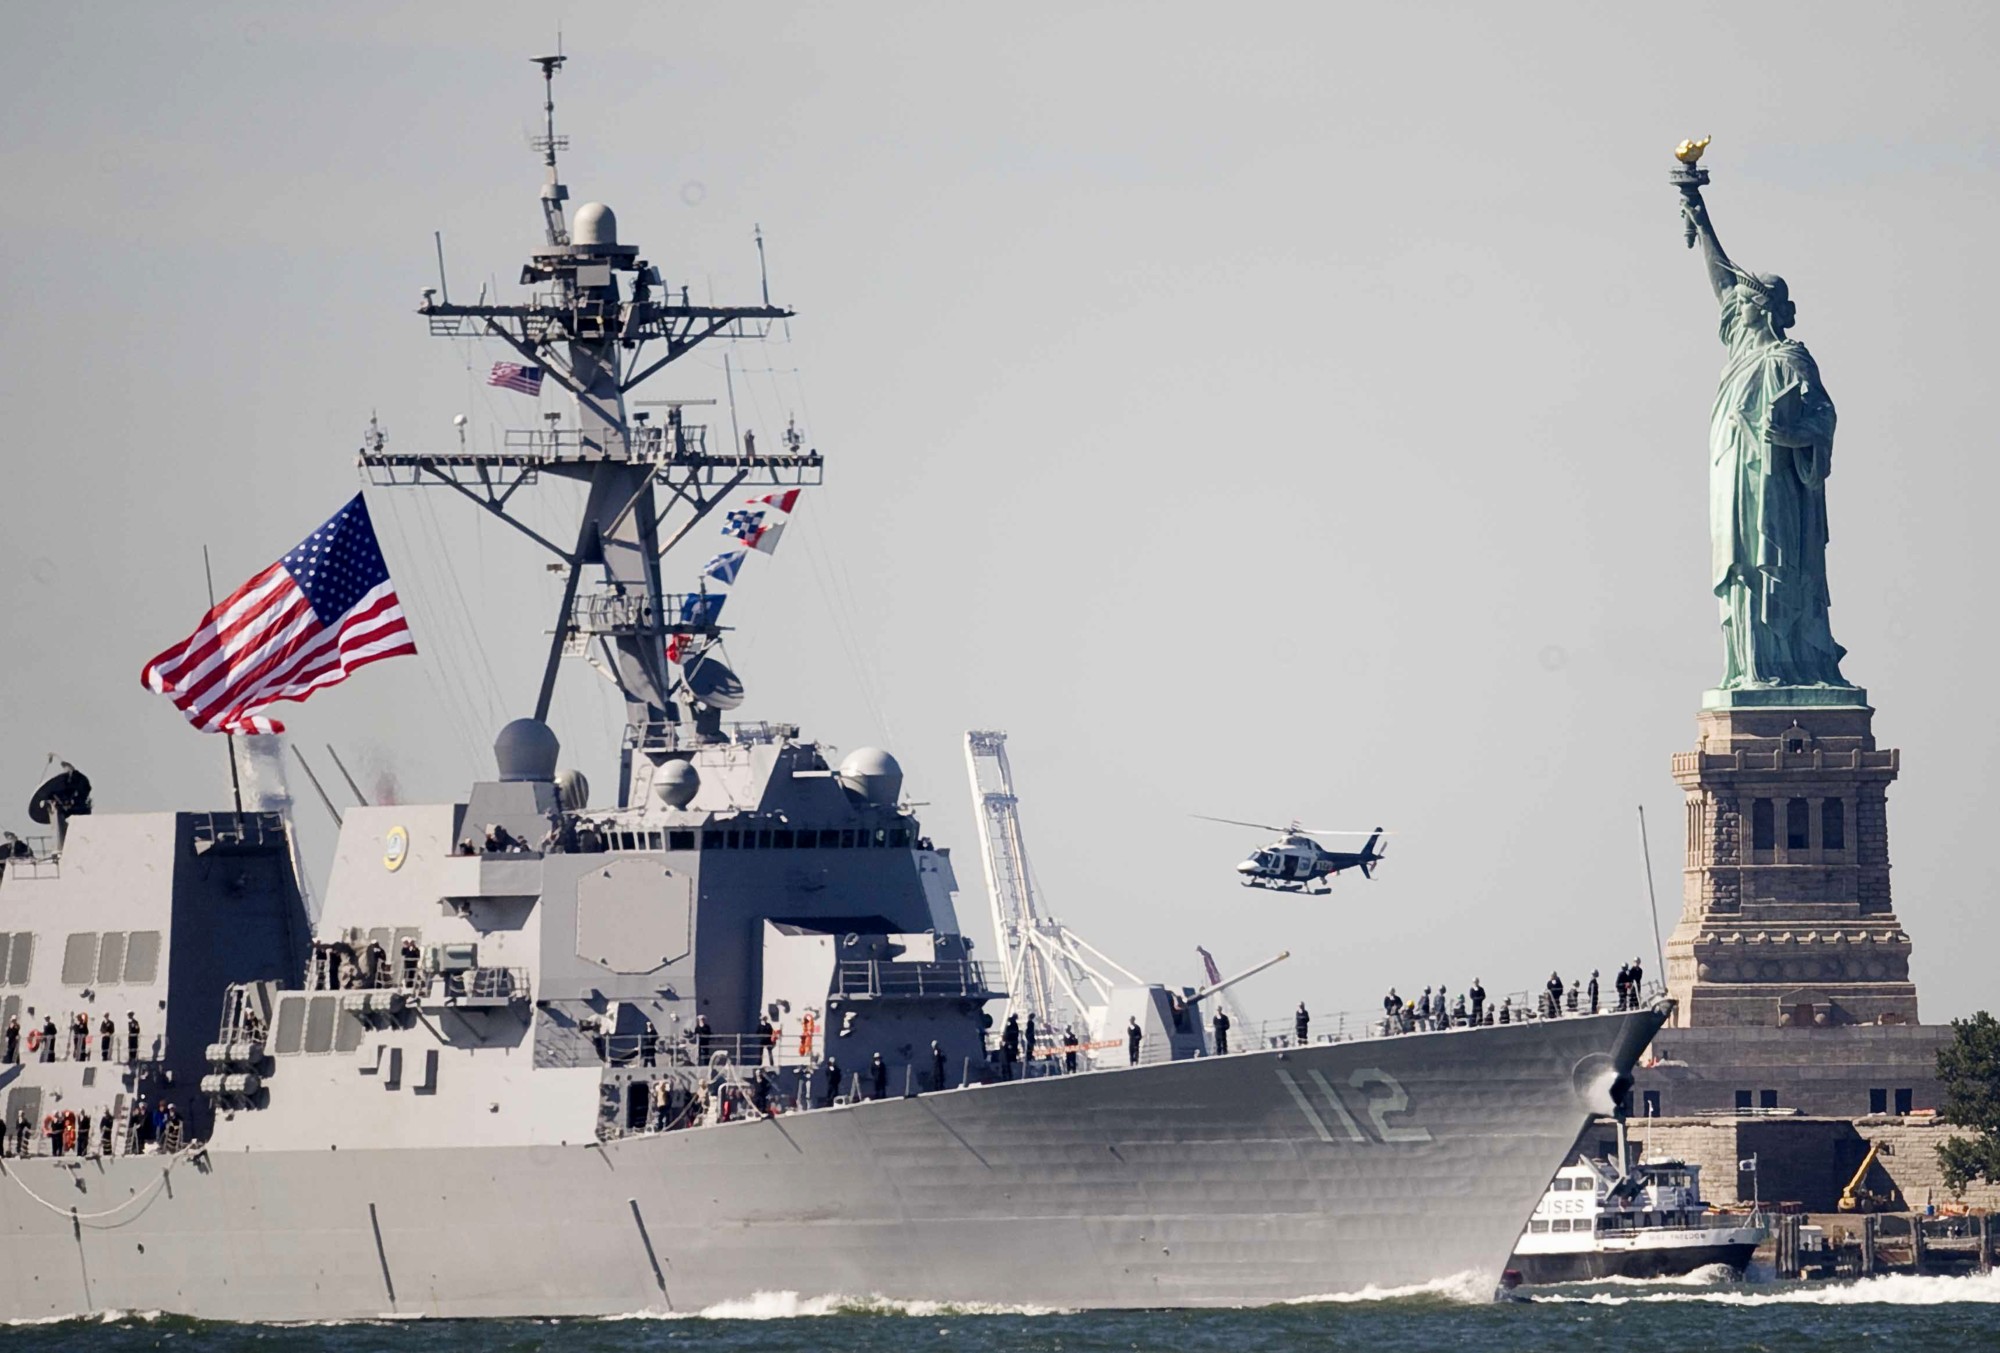 ddg-112 uss michael murphy arleigh burke class guided missile destroyer aegis us navy 05